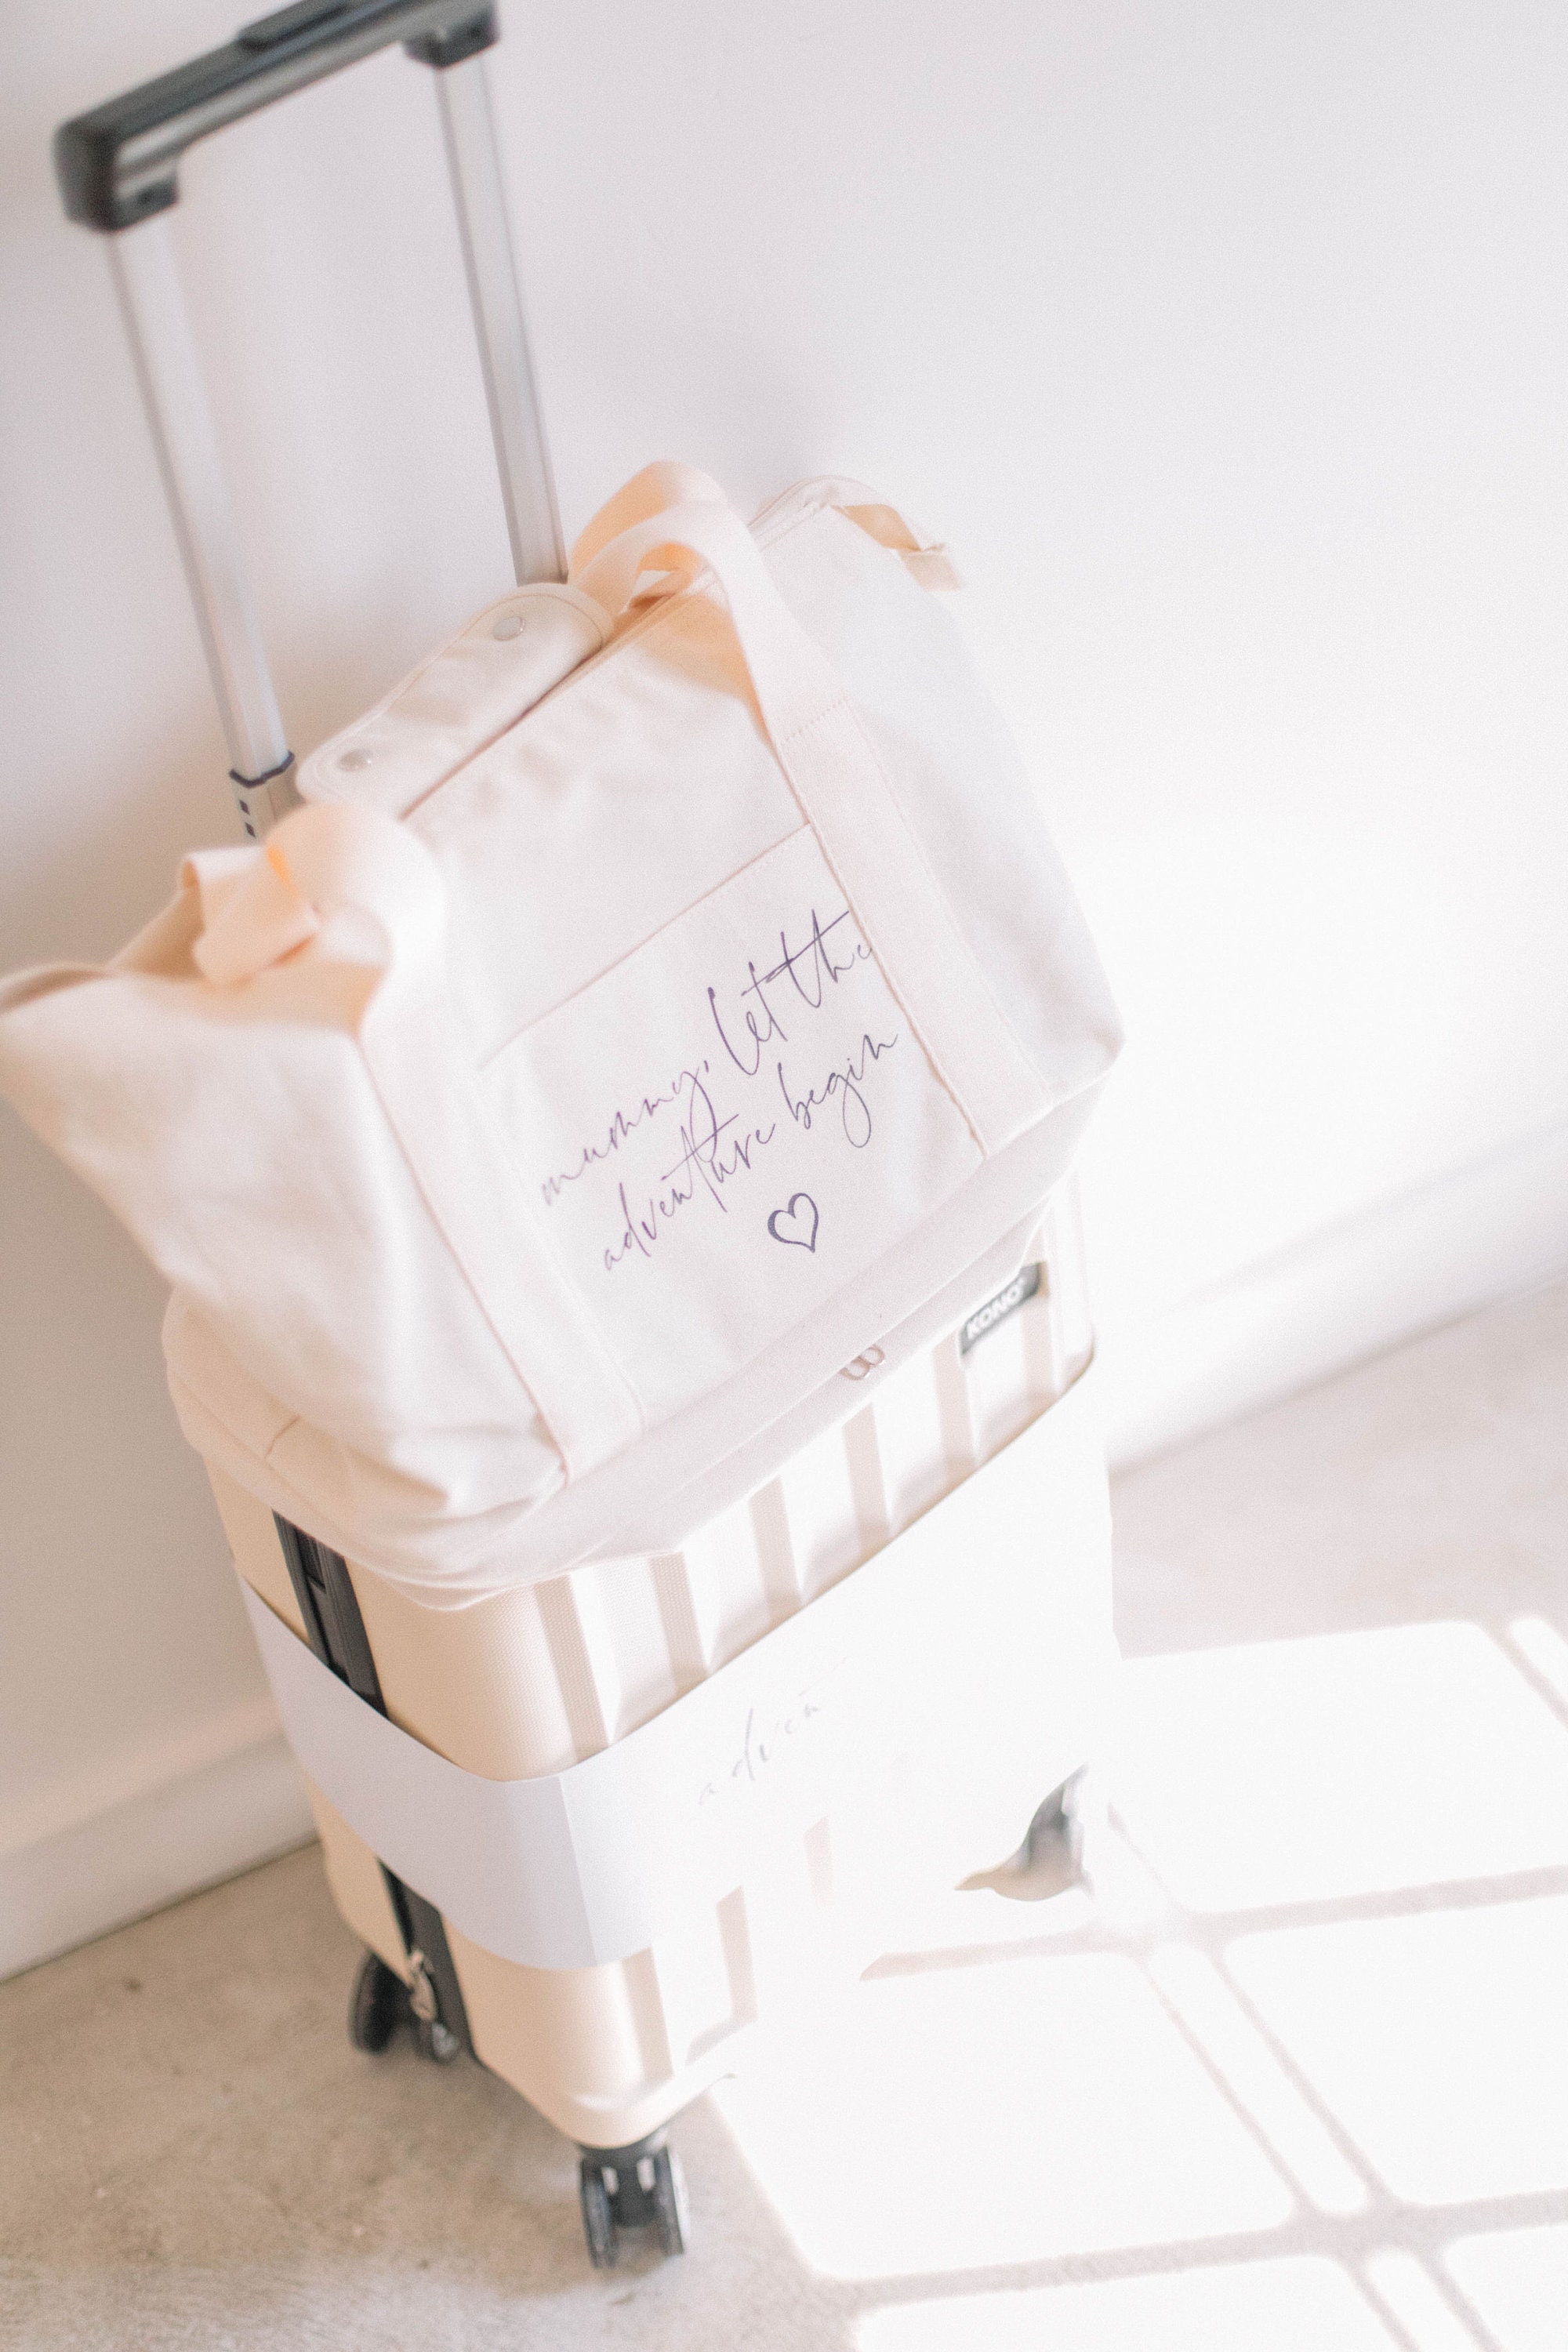 Expecting a Baby? Anna's Hospital Bag Essentials– The Woolly Brand